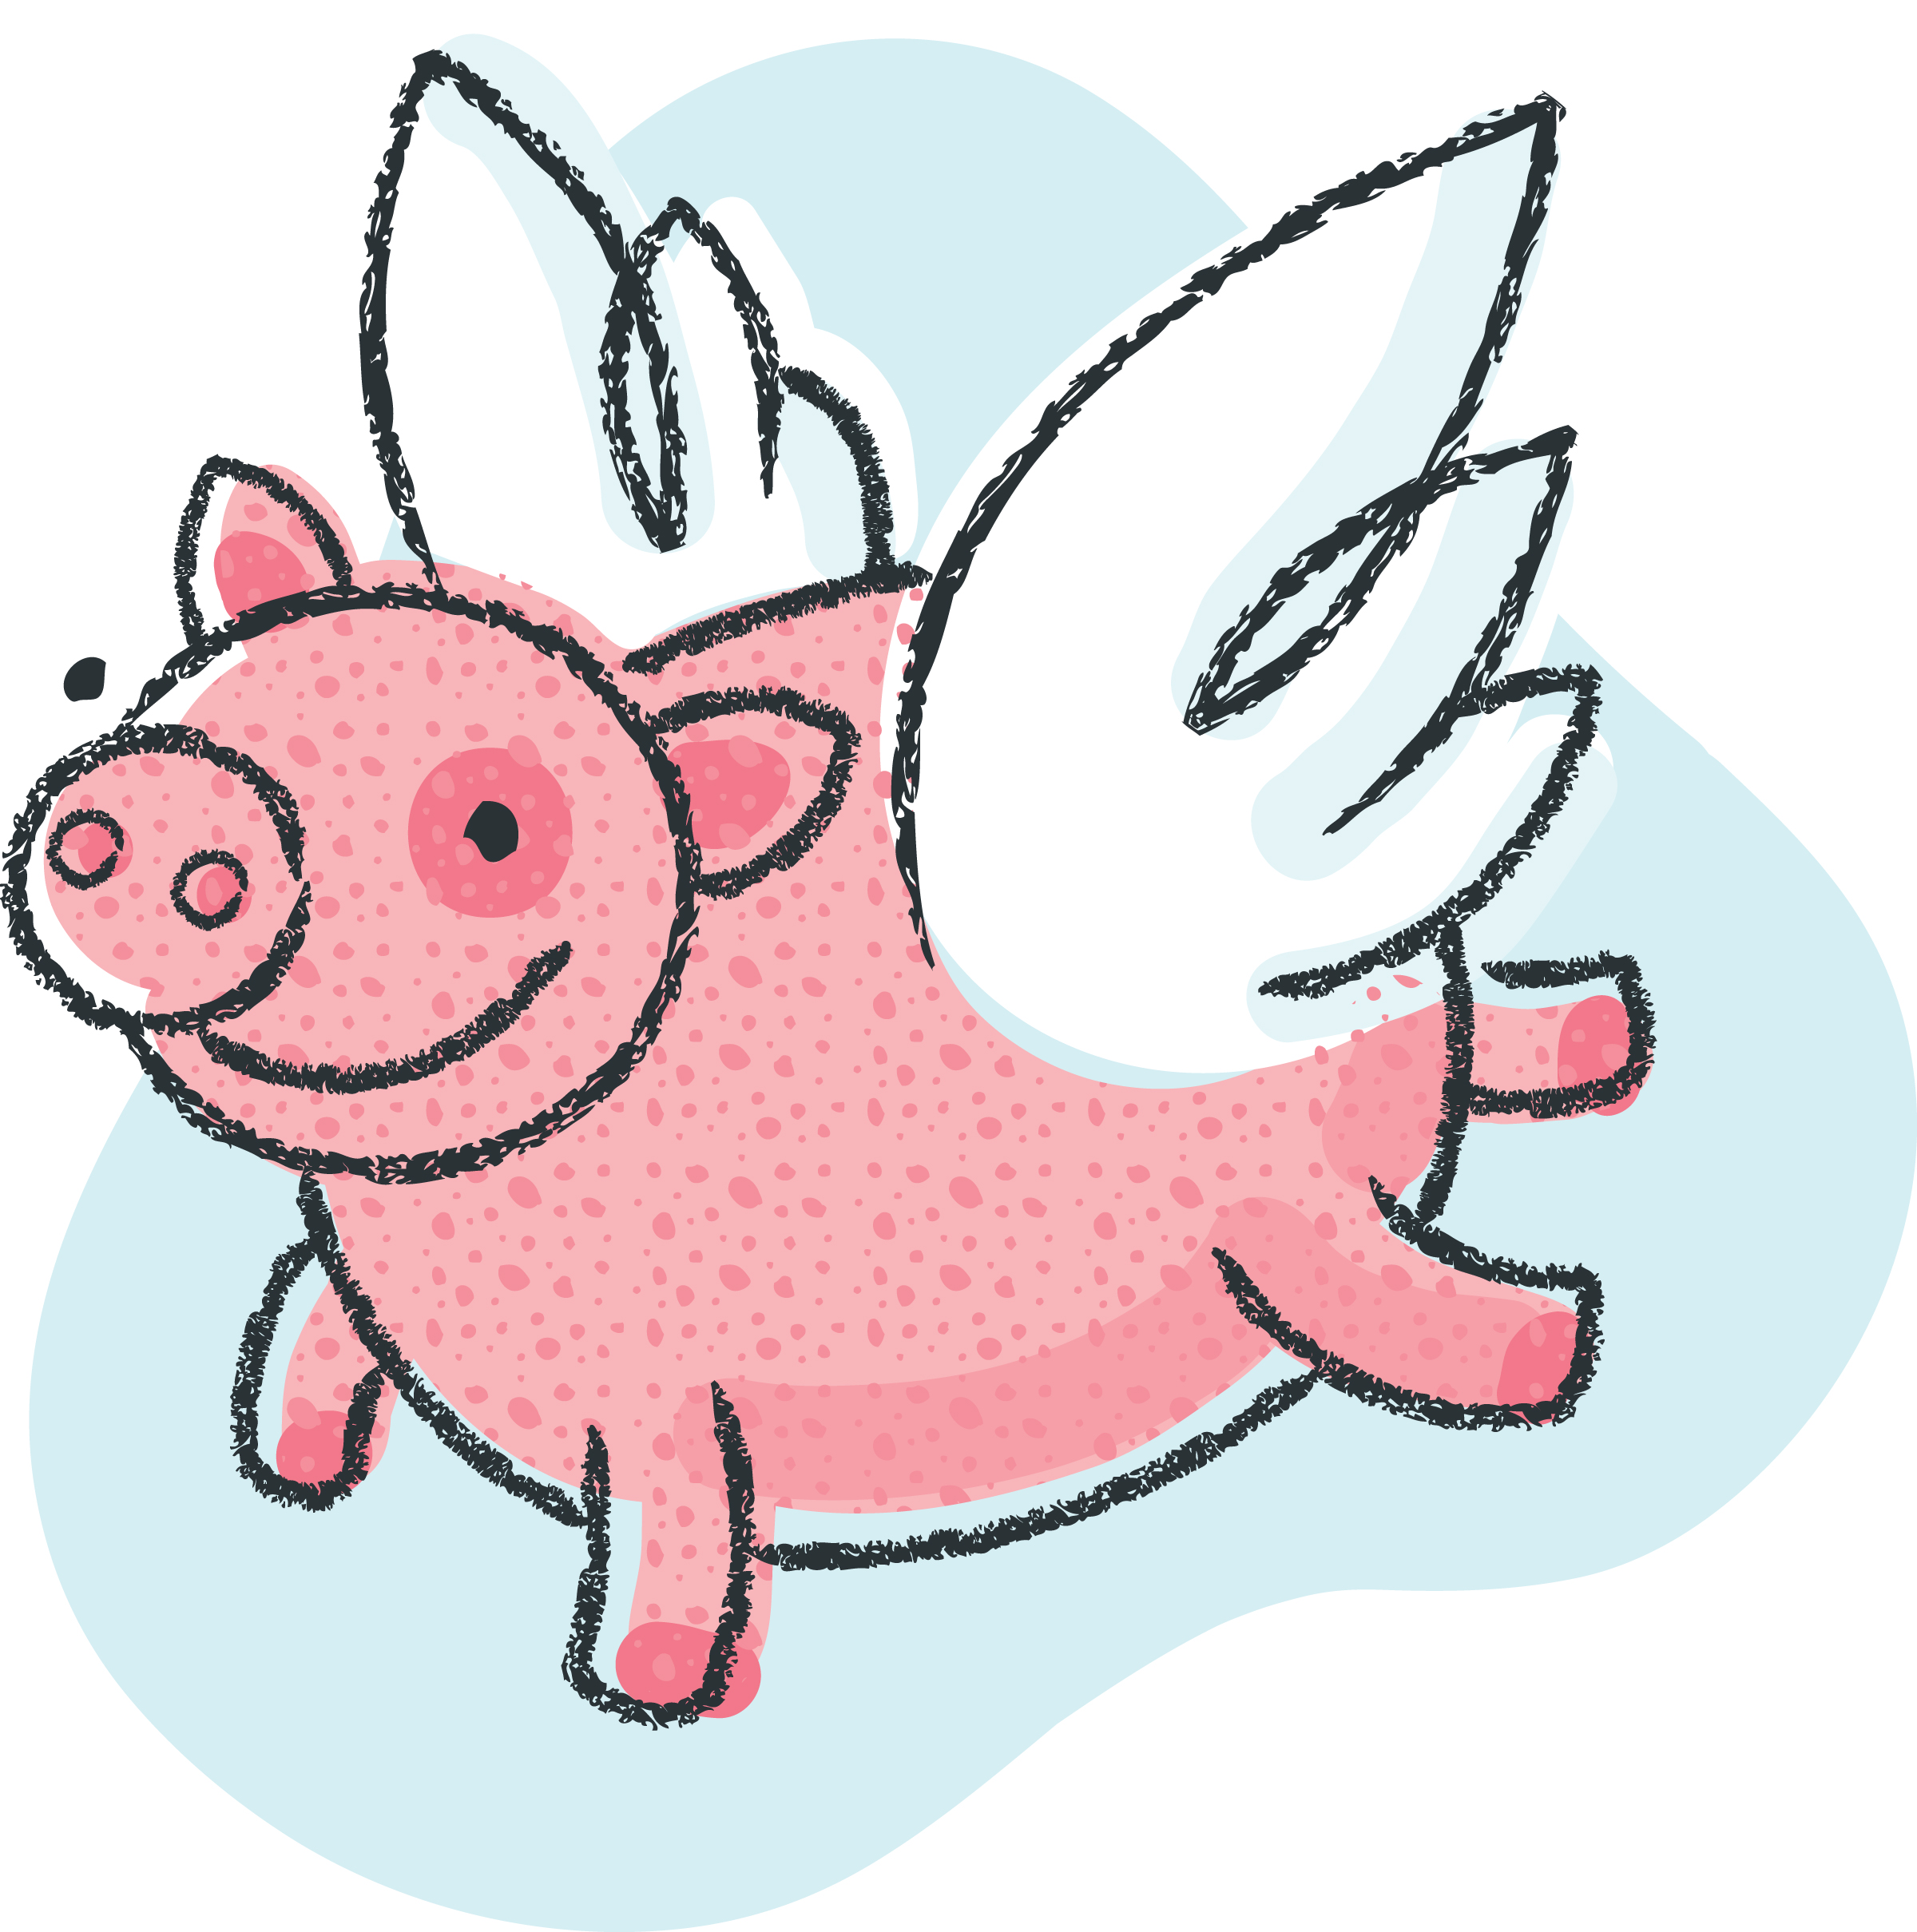 Free black and white pig clip art clipart image 4 2